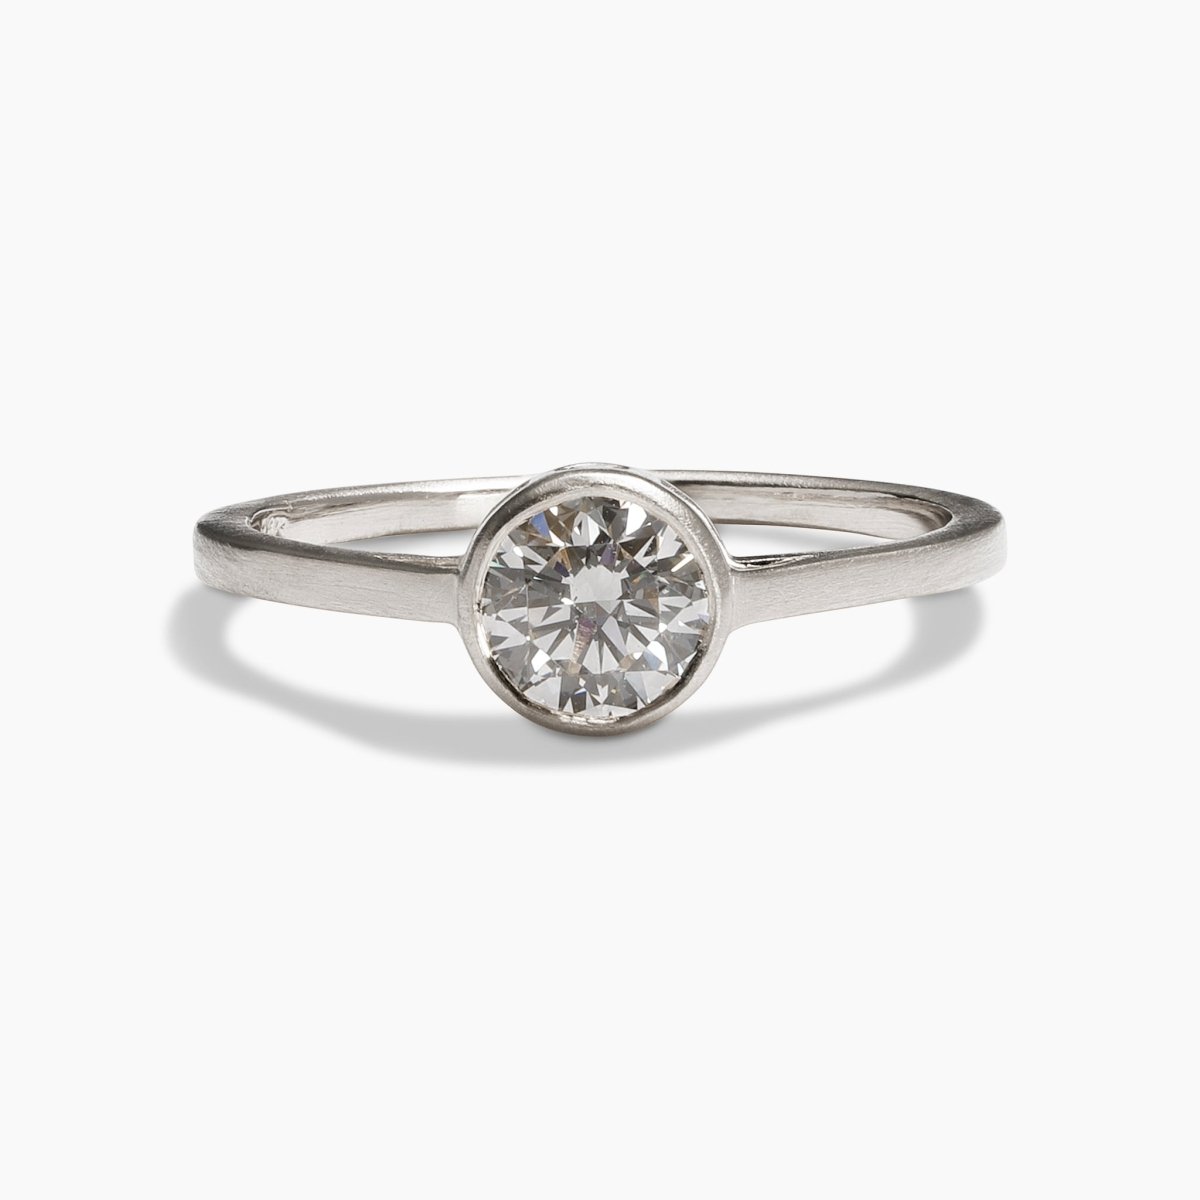 Sano ring from Betsy & Iya in a 14K recycled white gold band with two accent diamonds inset on the side and a central round brilliant cut lab-grown diamond (0.6 ct).